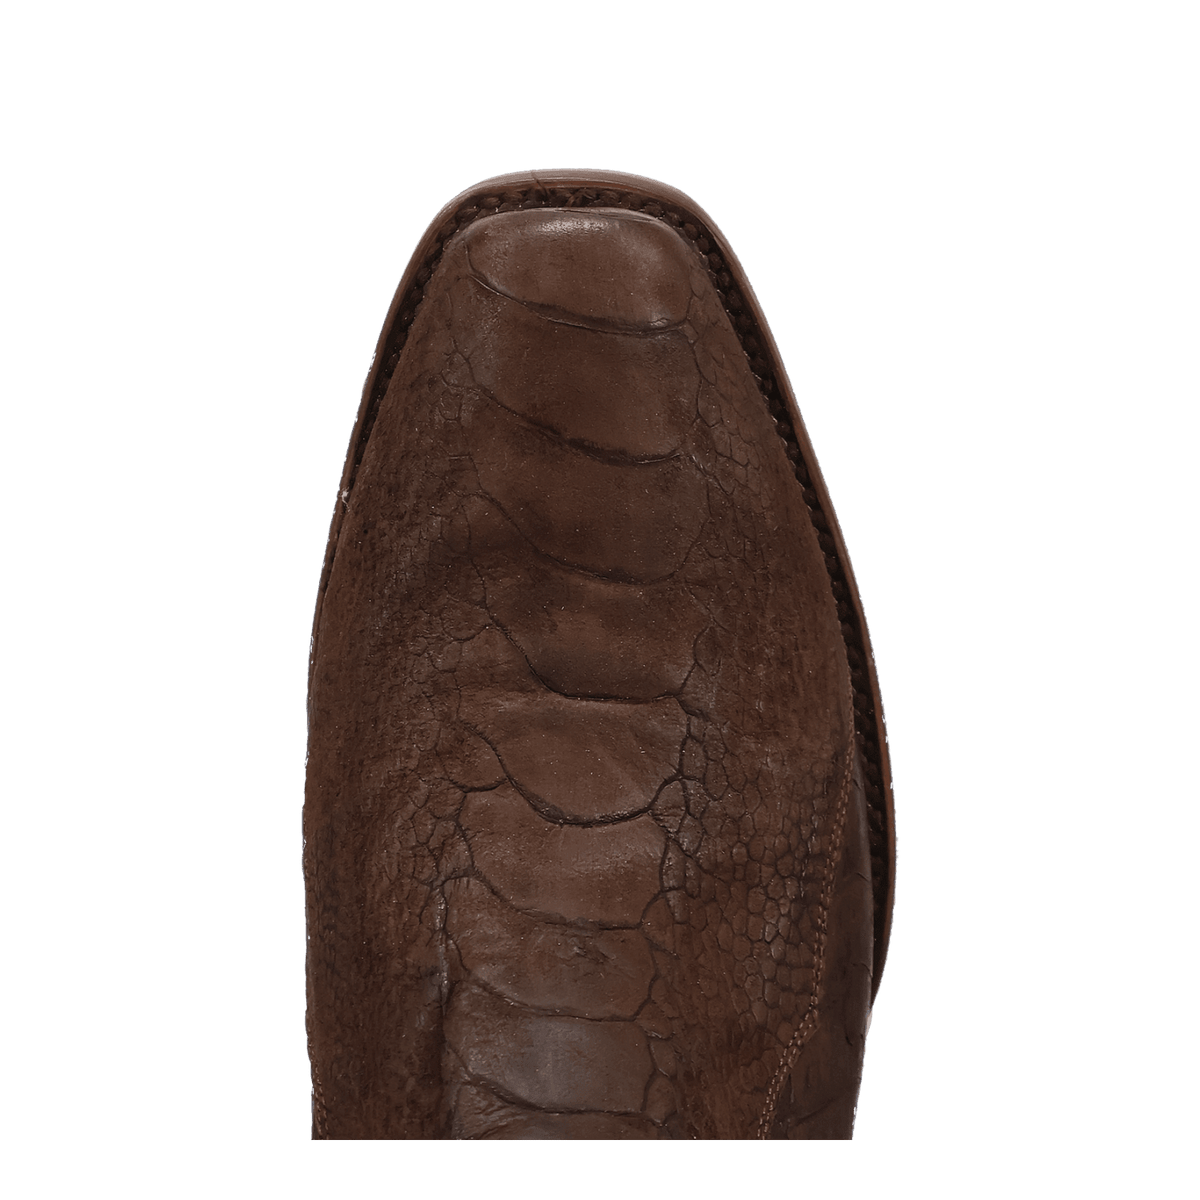 ANDERS OSTRICH LEG  BOOT Image